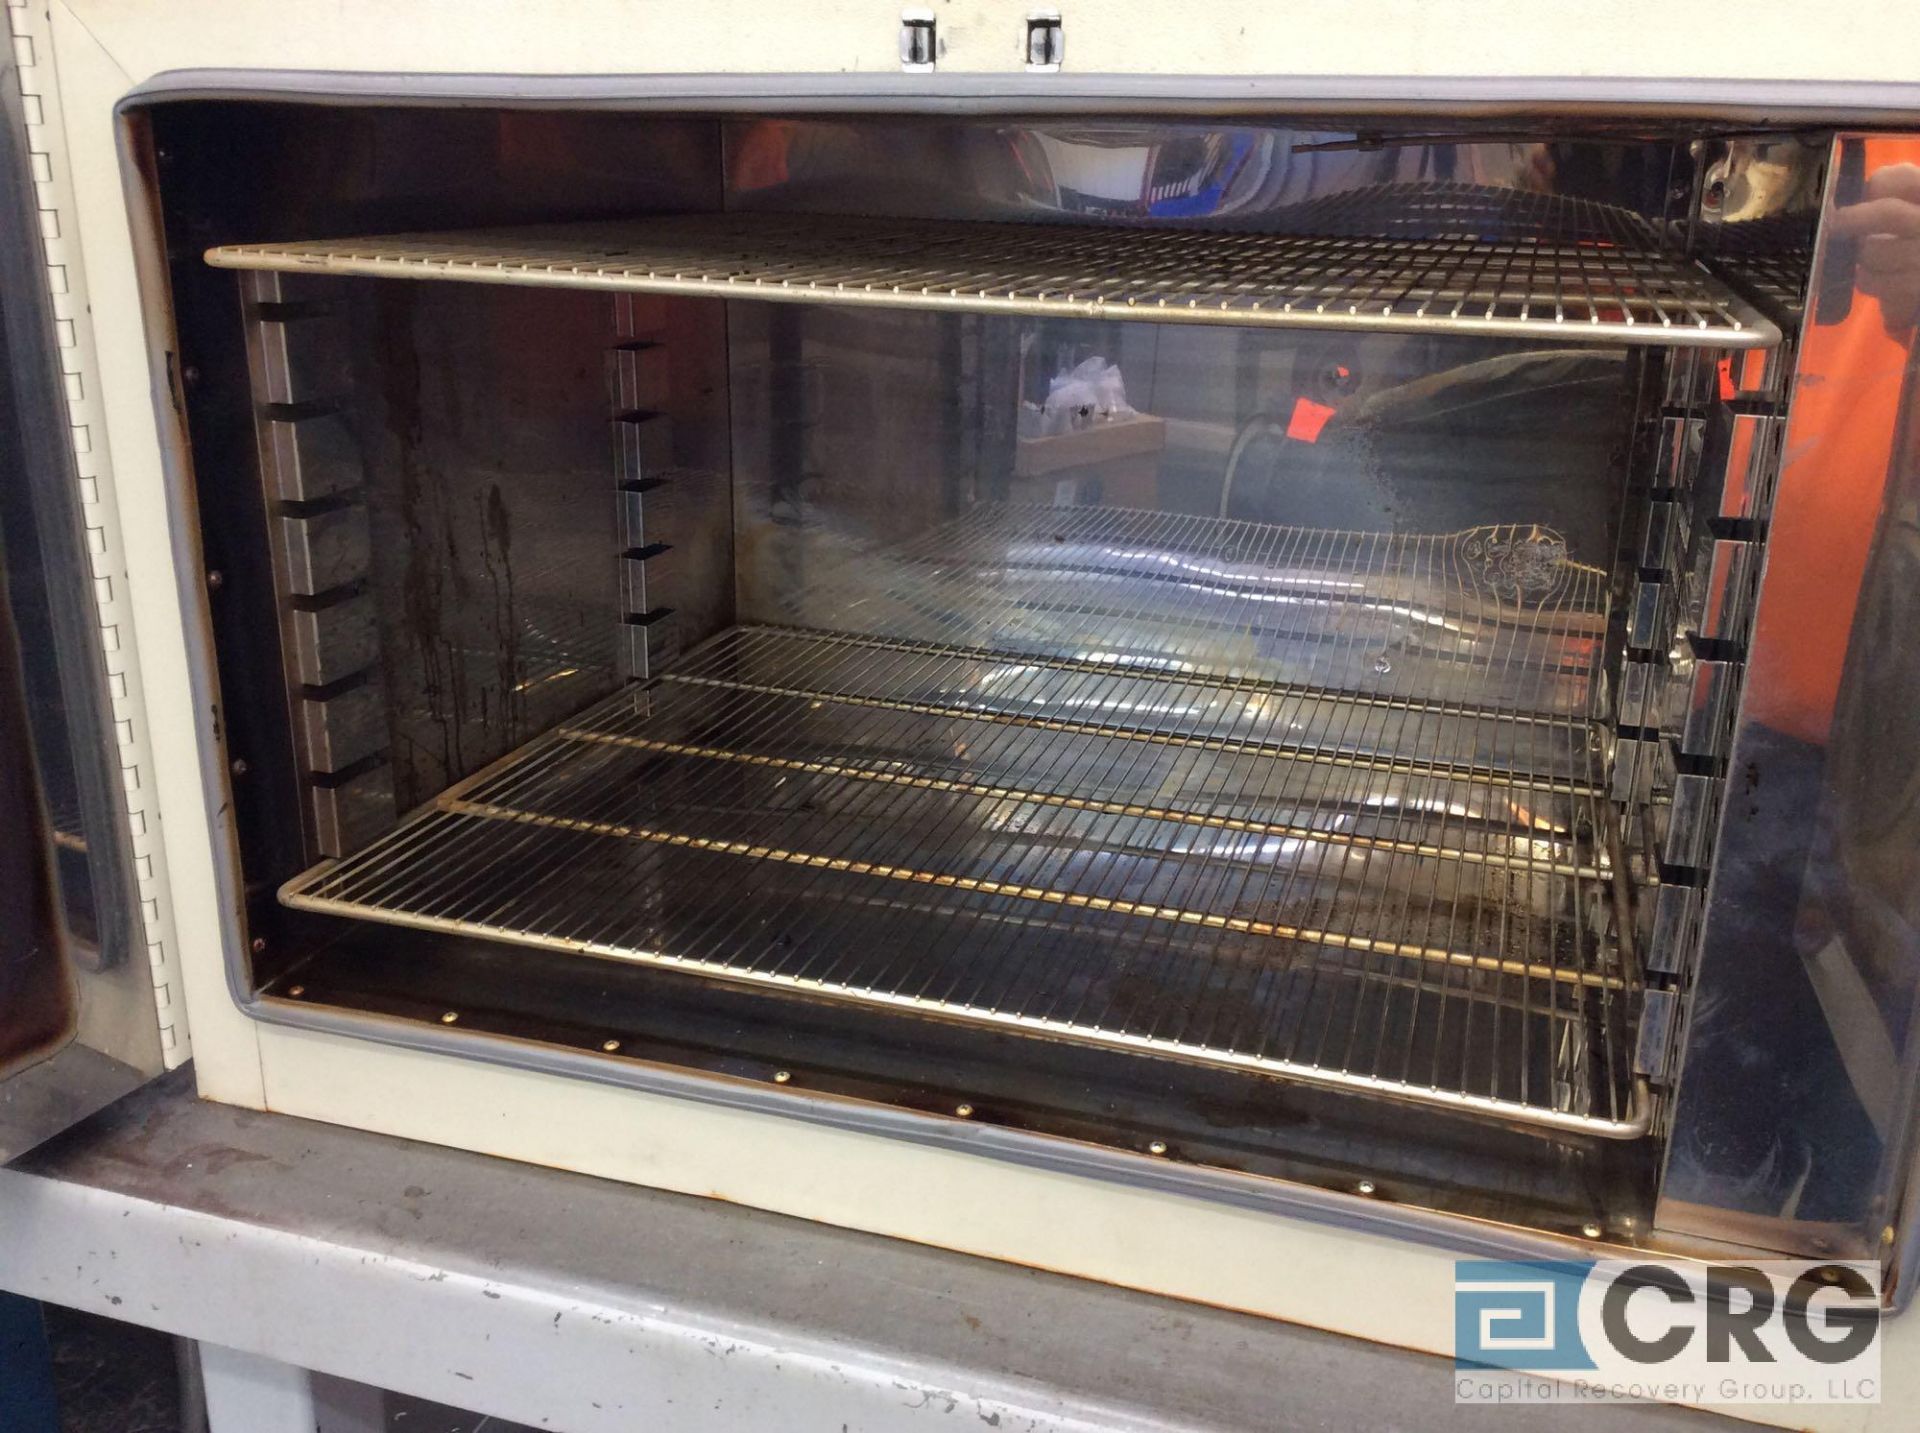 Grieve Industrial oven, mn NB-350, 2000 watts, 208 volts, 3 phase, 28 wide x 18 high x 24 deep - Image 3 of 3